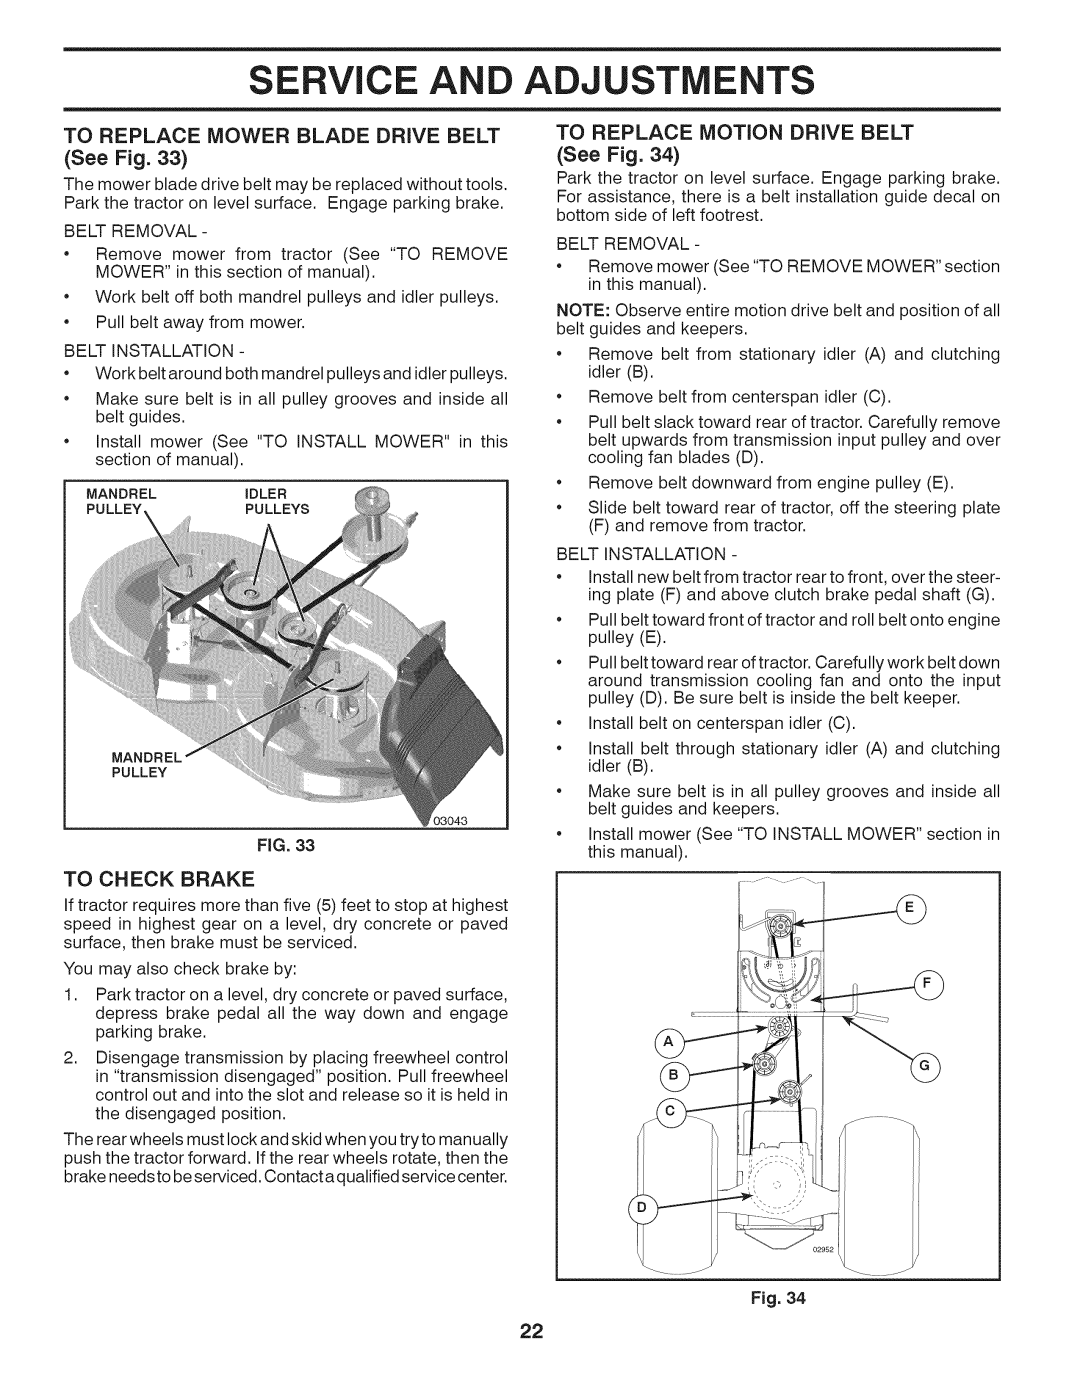 Husqvarna LTH18538 Service And, Adjustments, See Fig, To Replace Mower Blade Drive Belt, To Replace Motion Drive Belt 